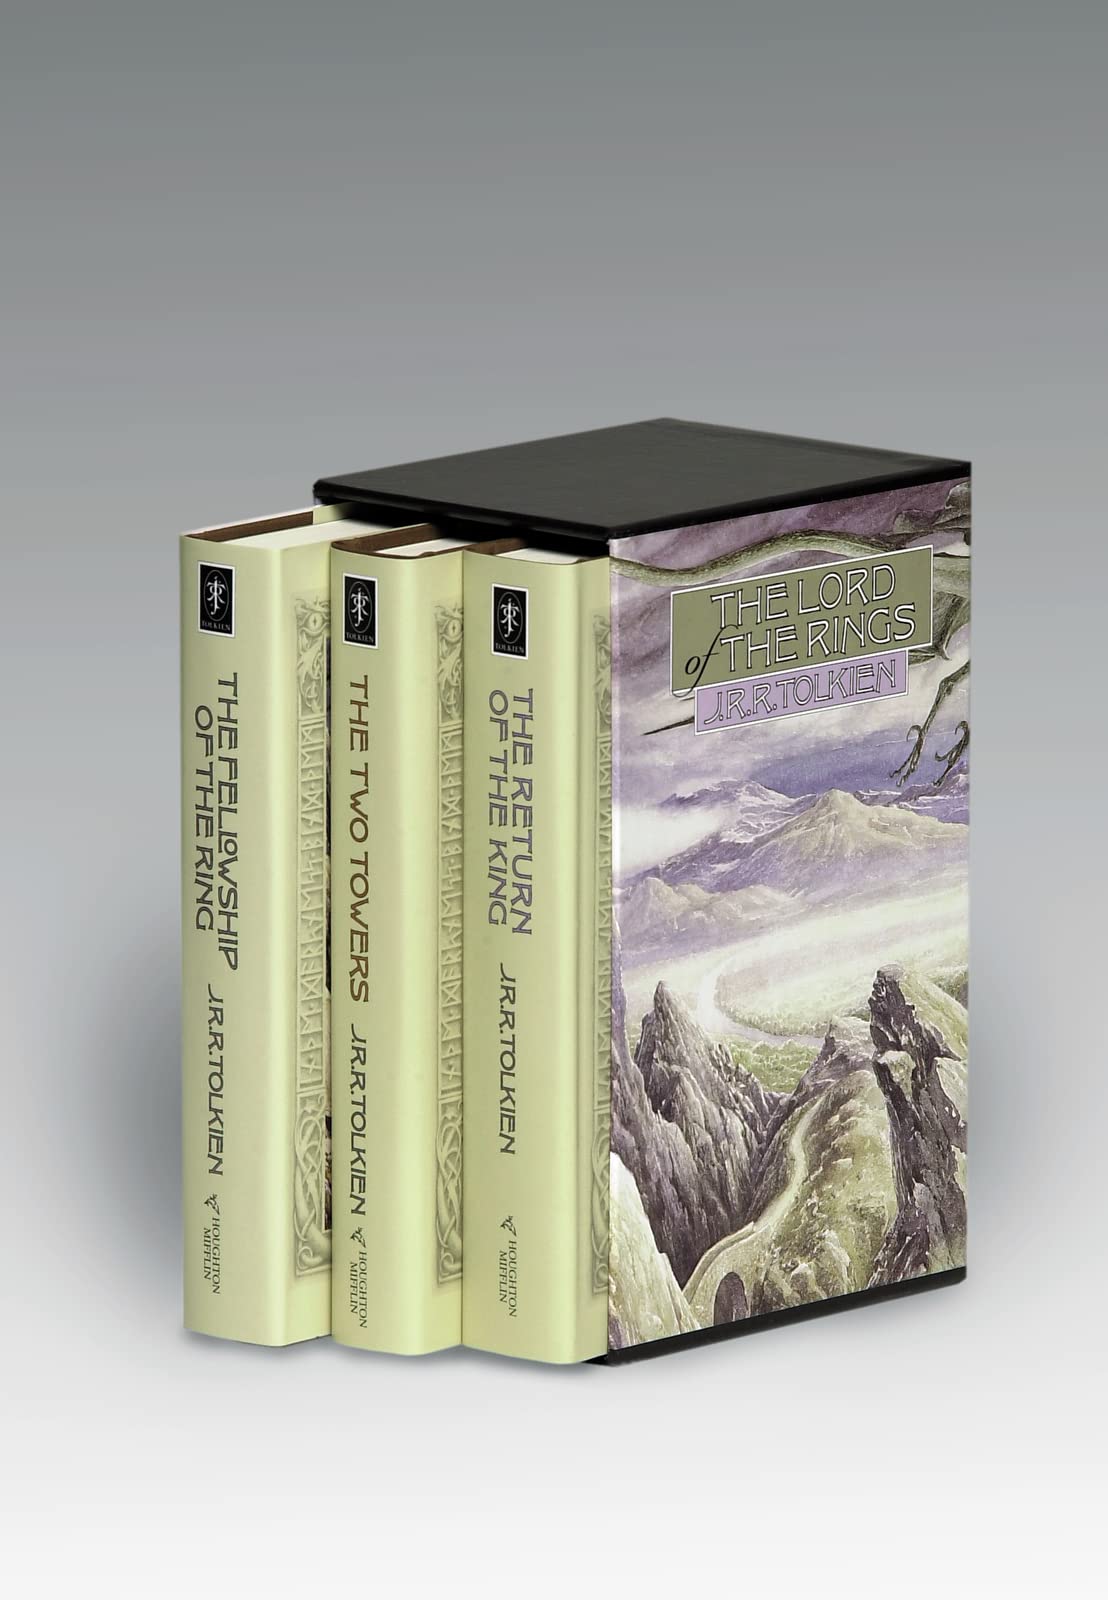 Lord of the Rings (hardcover boxset, trilogy)